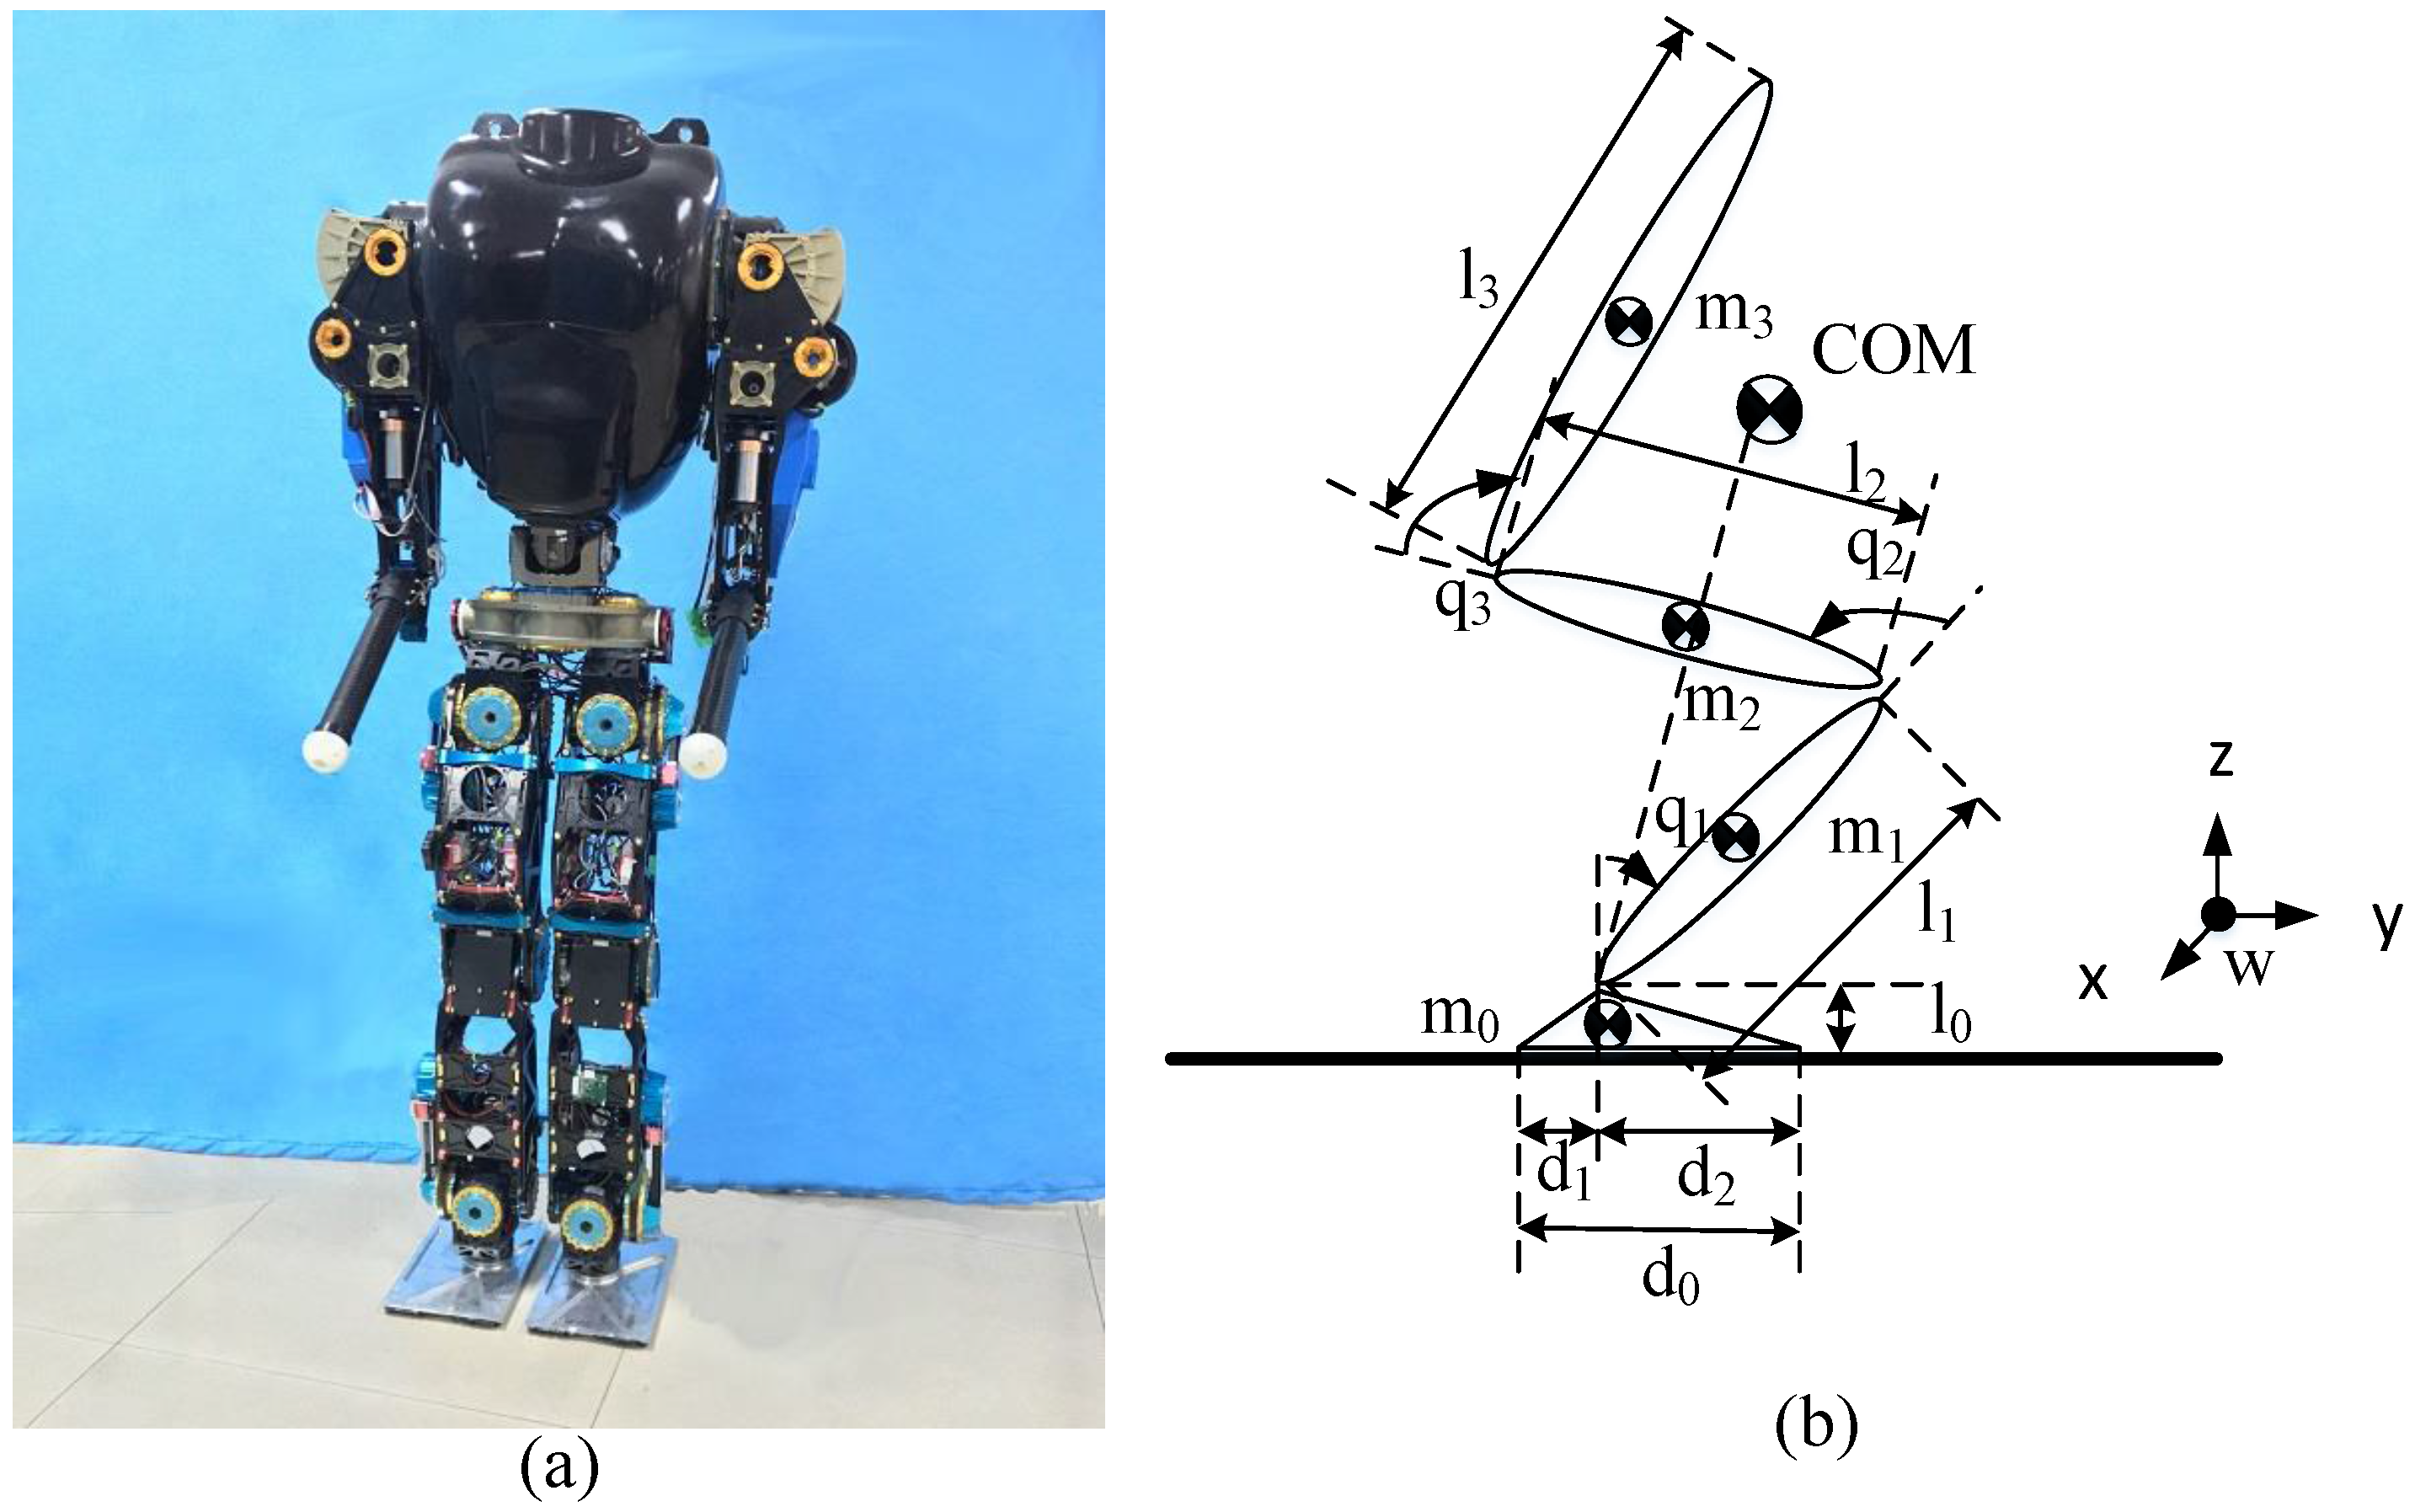 PDF) Fast yet predictable braking manoeuvers for real-time robot control